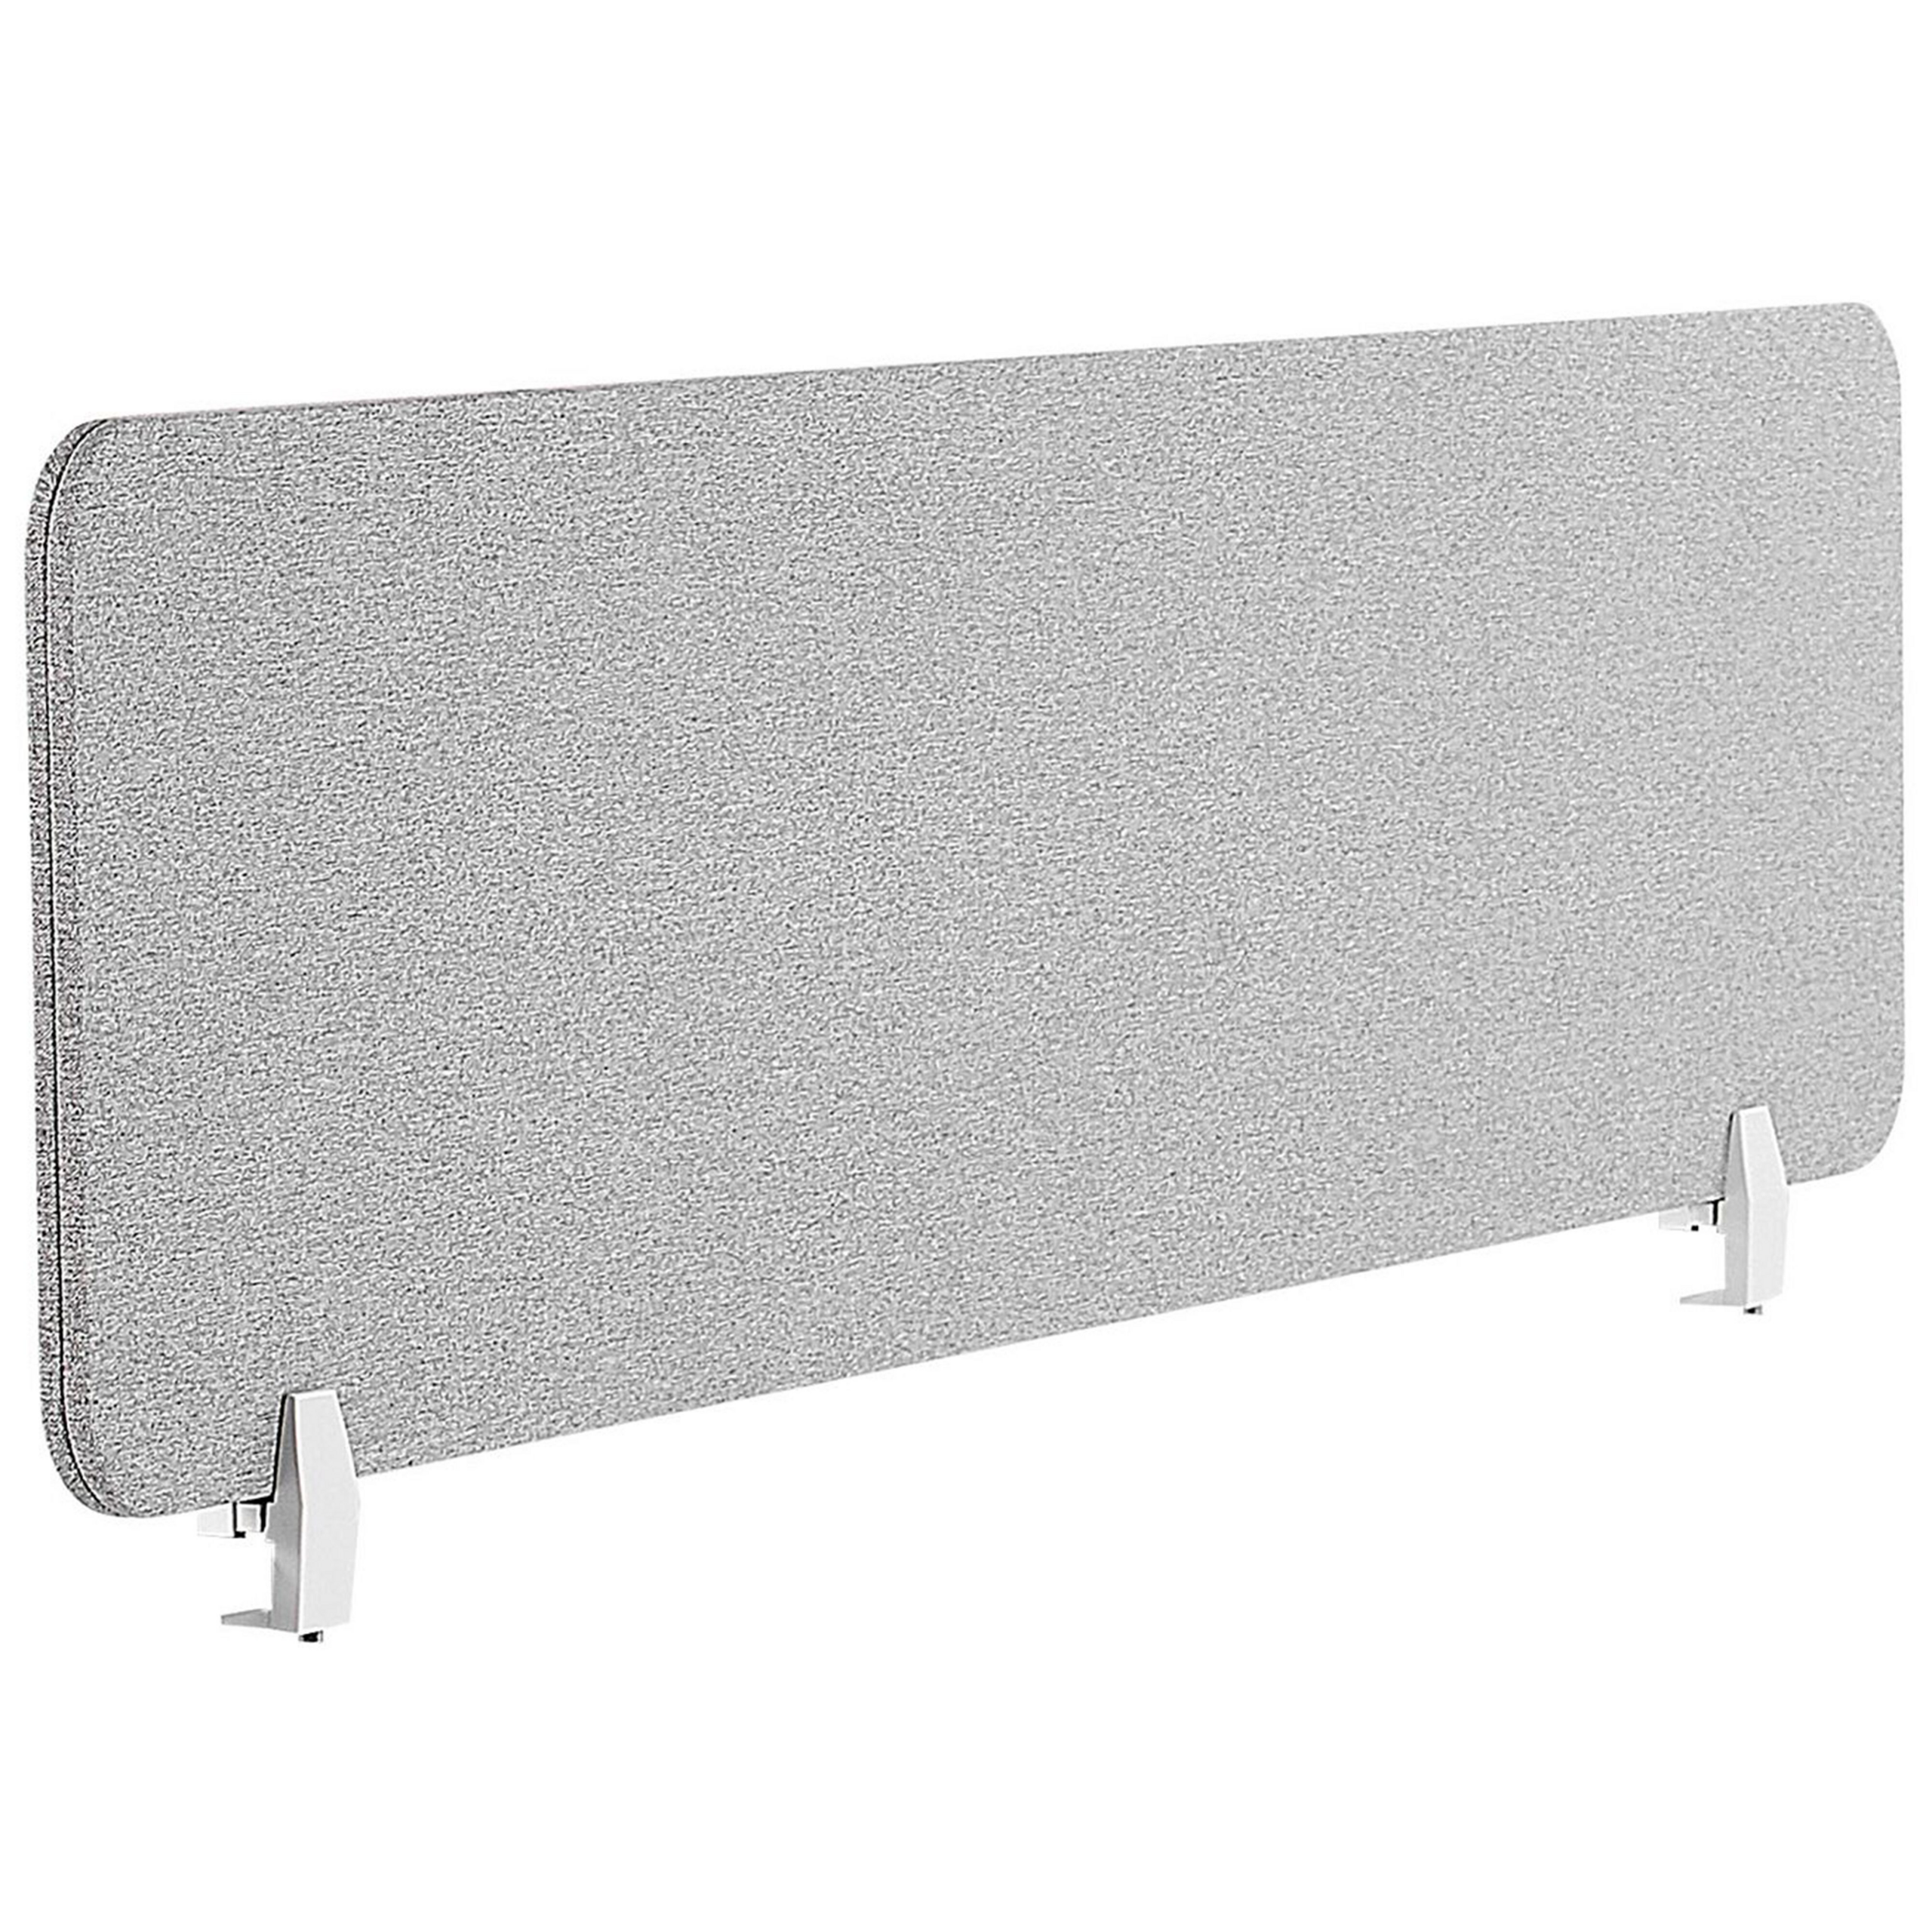 Beliani Desk Screen Light Grey PET Board Fabric Cover 130 x 40 cm Acoustic Screen Modular Mounting Clamps Home Office Material:Polyester Size:2x40x130